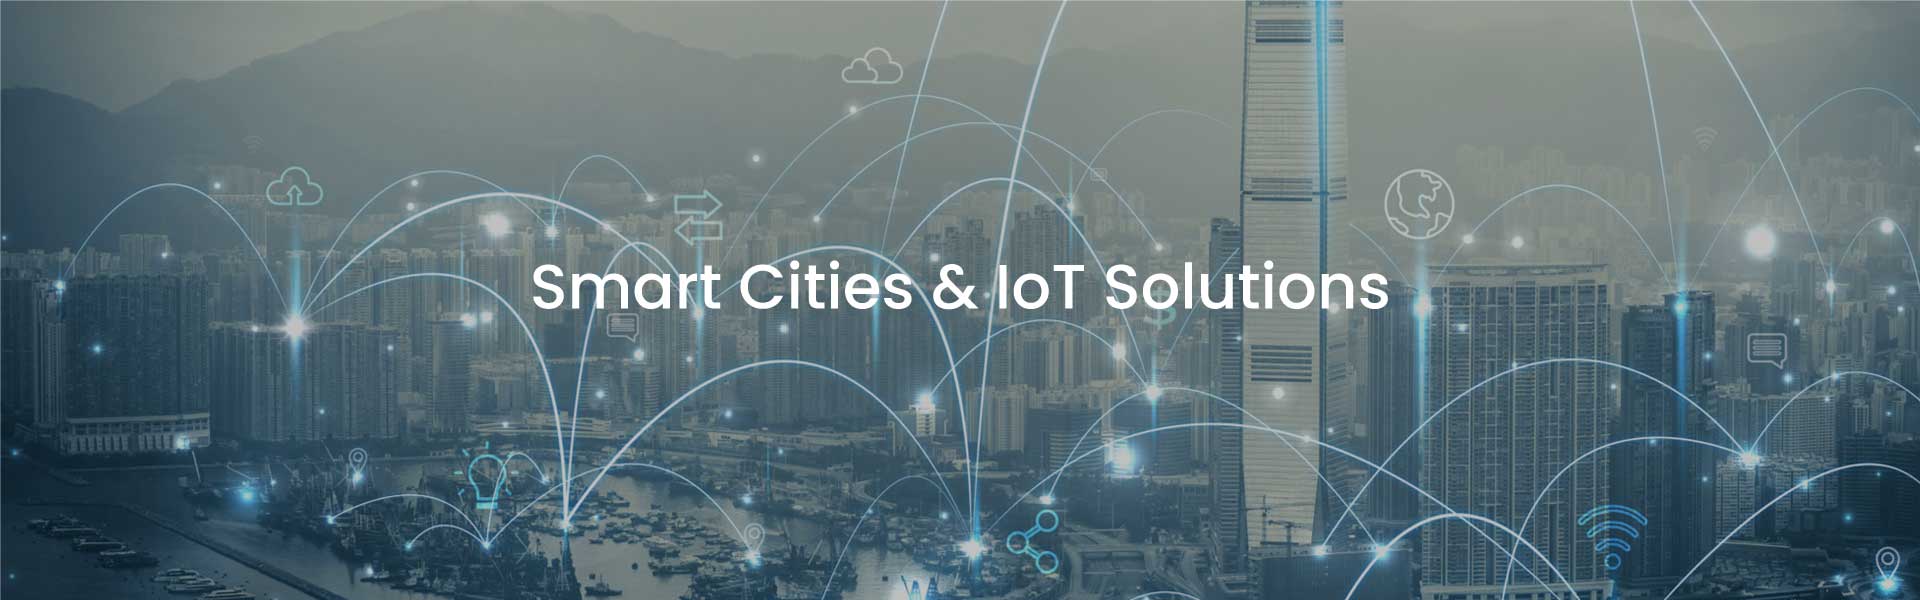 Smart Cities - How IoT is Changing the Way We Live